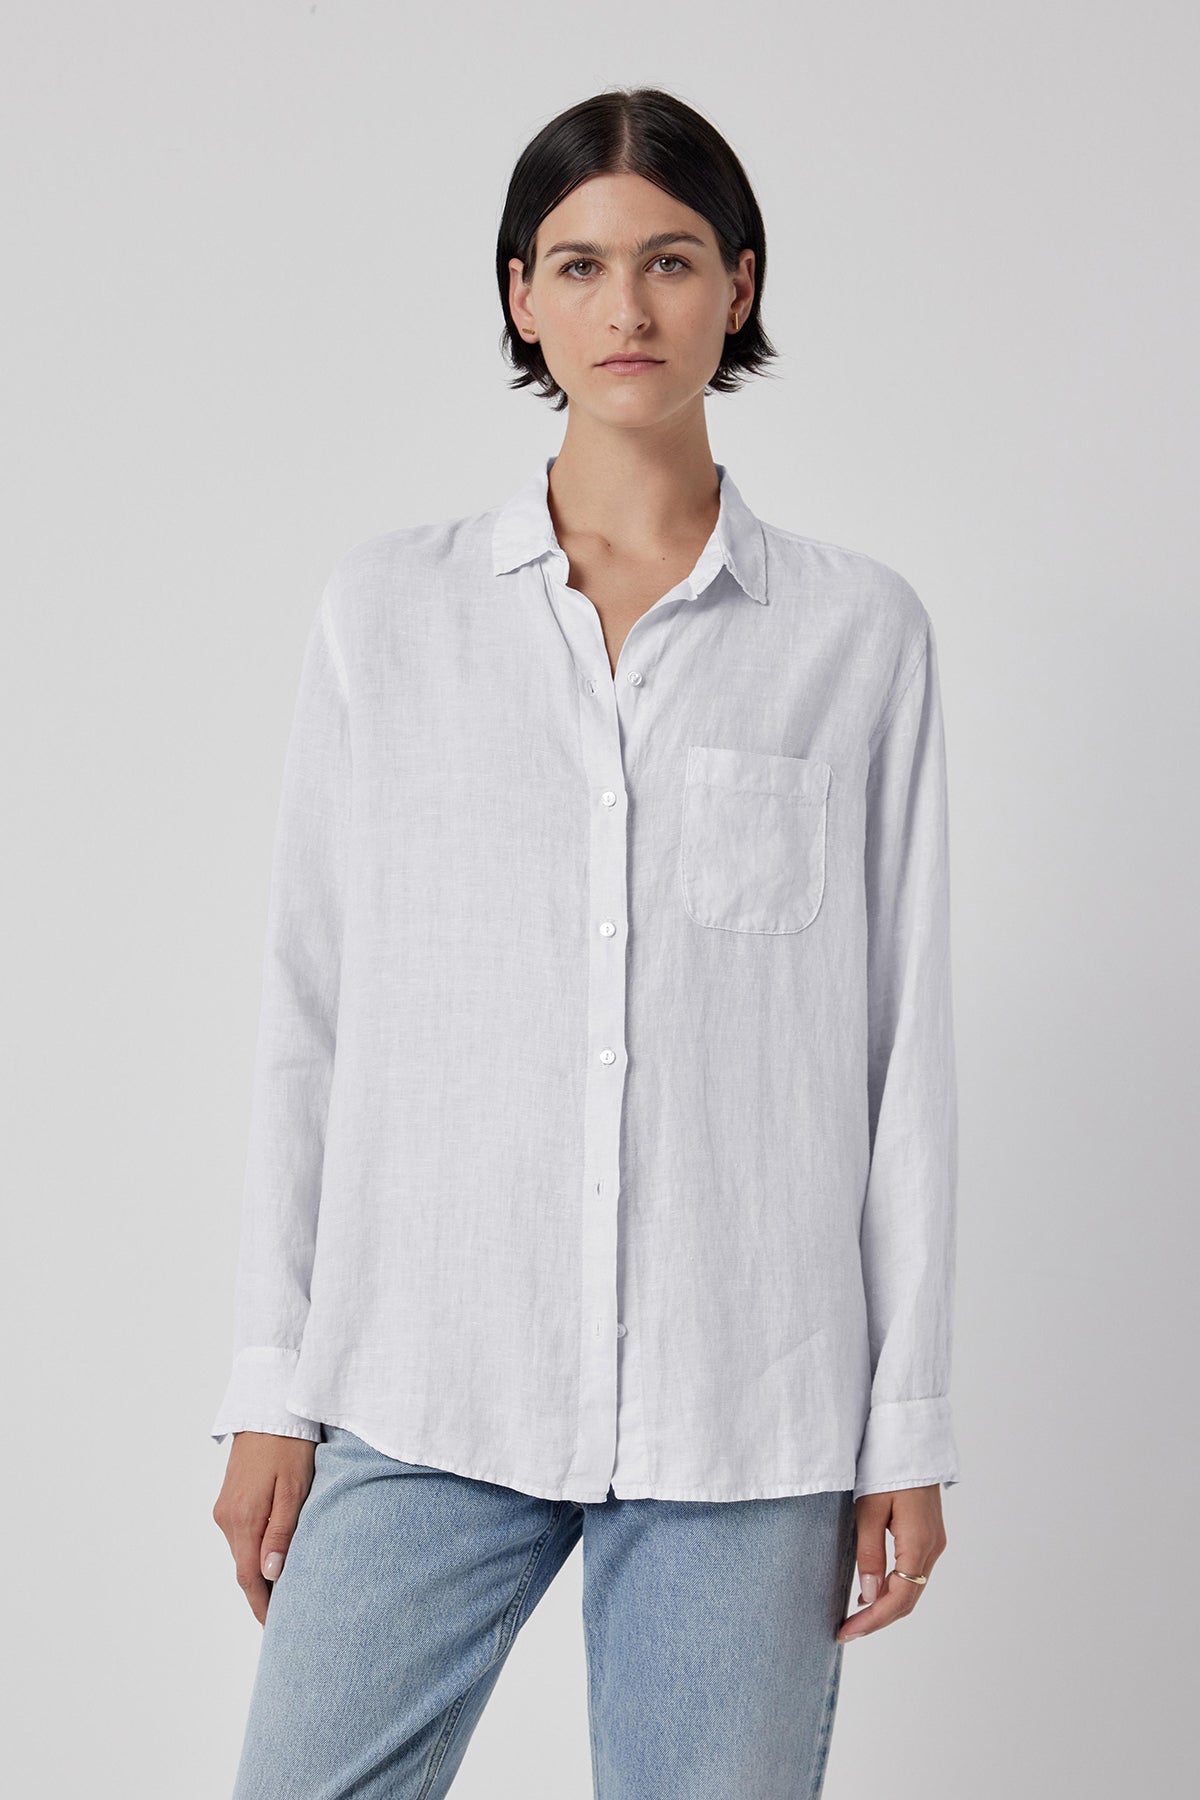 A woman wearing a Velvet by Jenny Graham Mulholland shirt in casual white linen with a scooped hemline and blue jeans stands against a grey background.-36463556231361